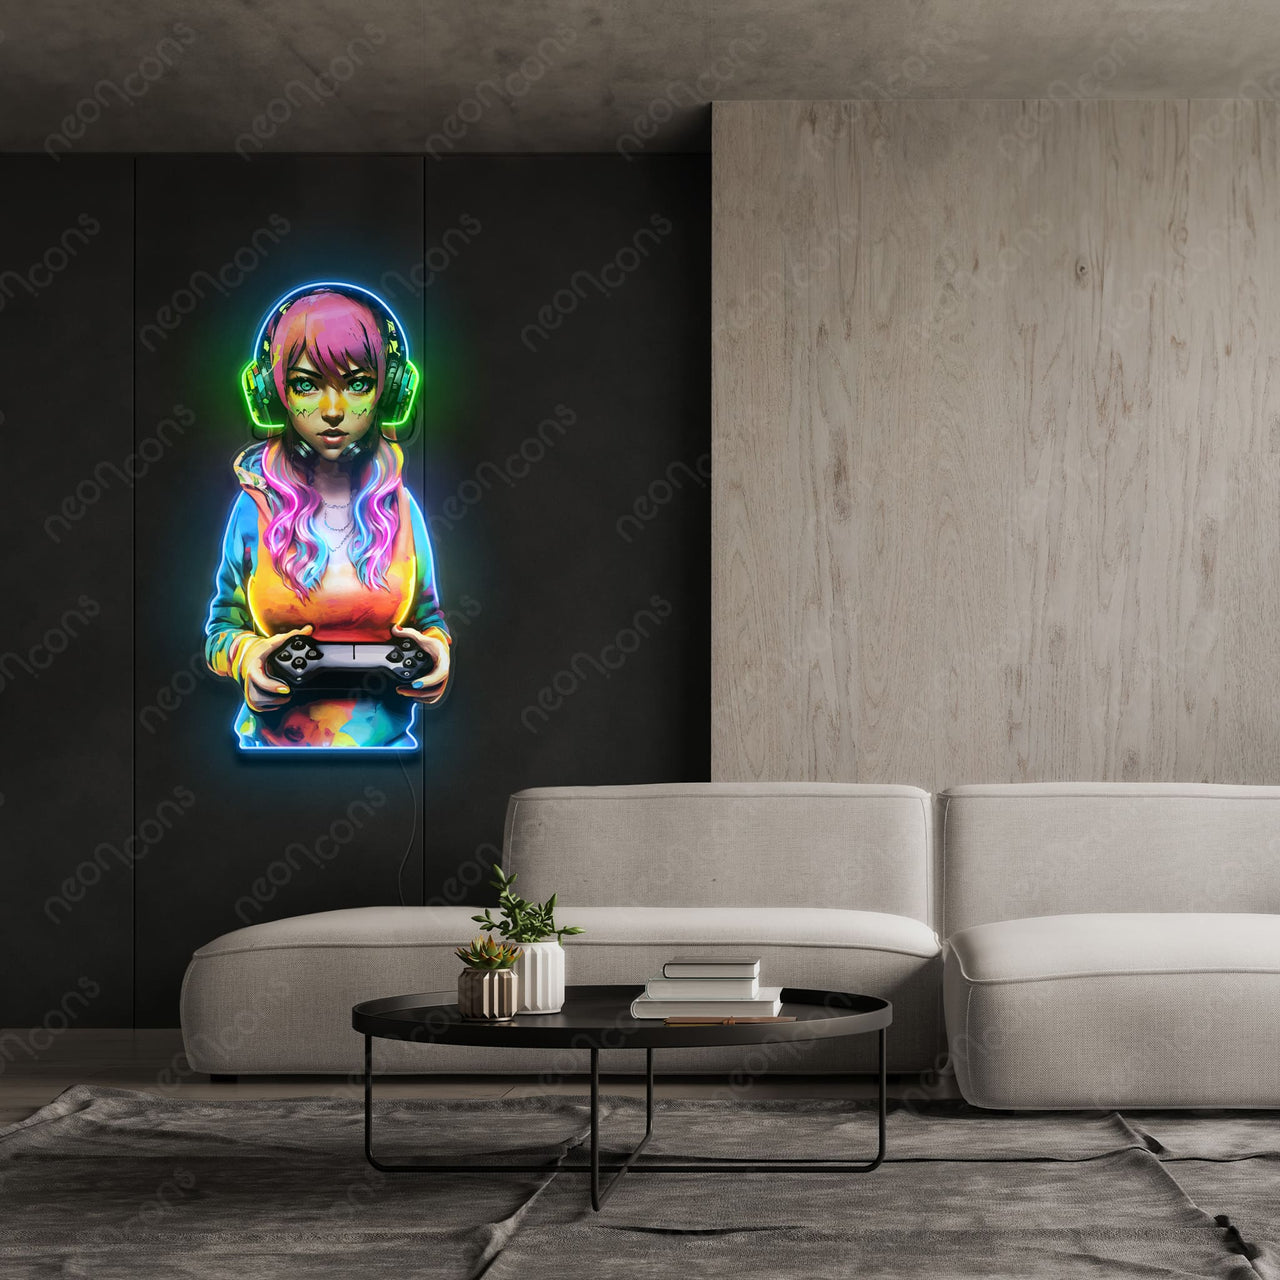 "Colorful Gamer" Neon x Acrylic Artwork by Neon Icons